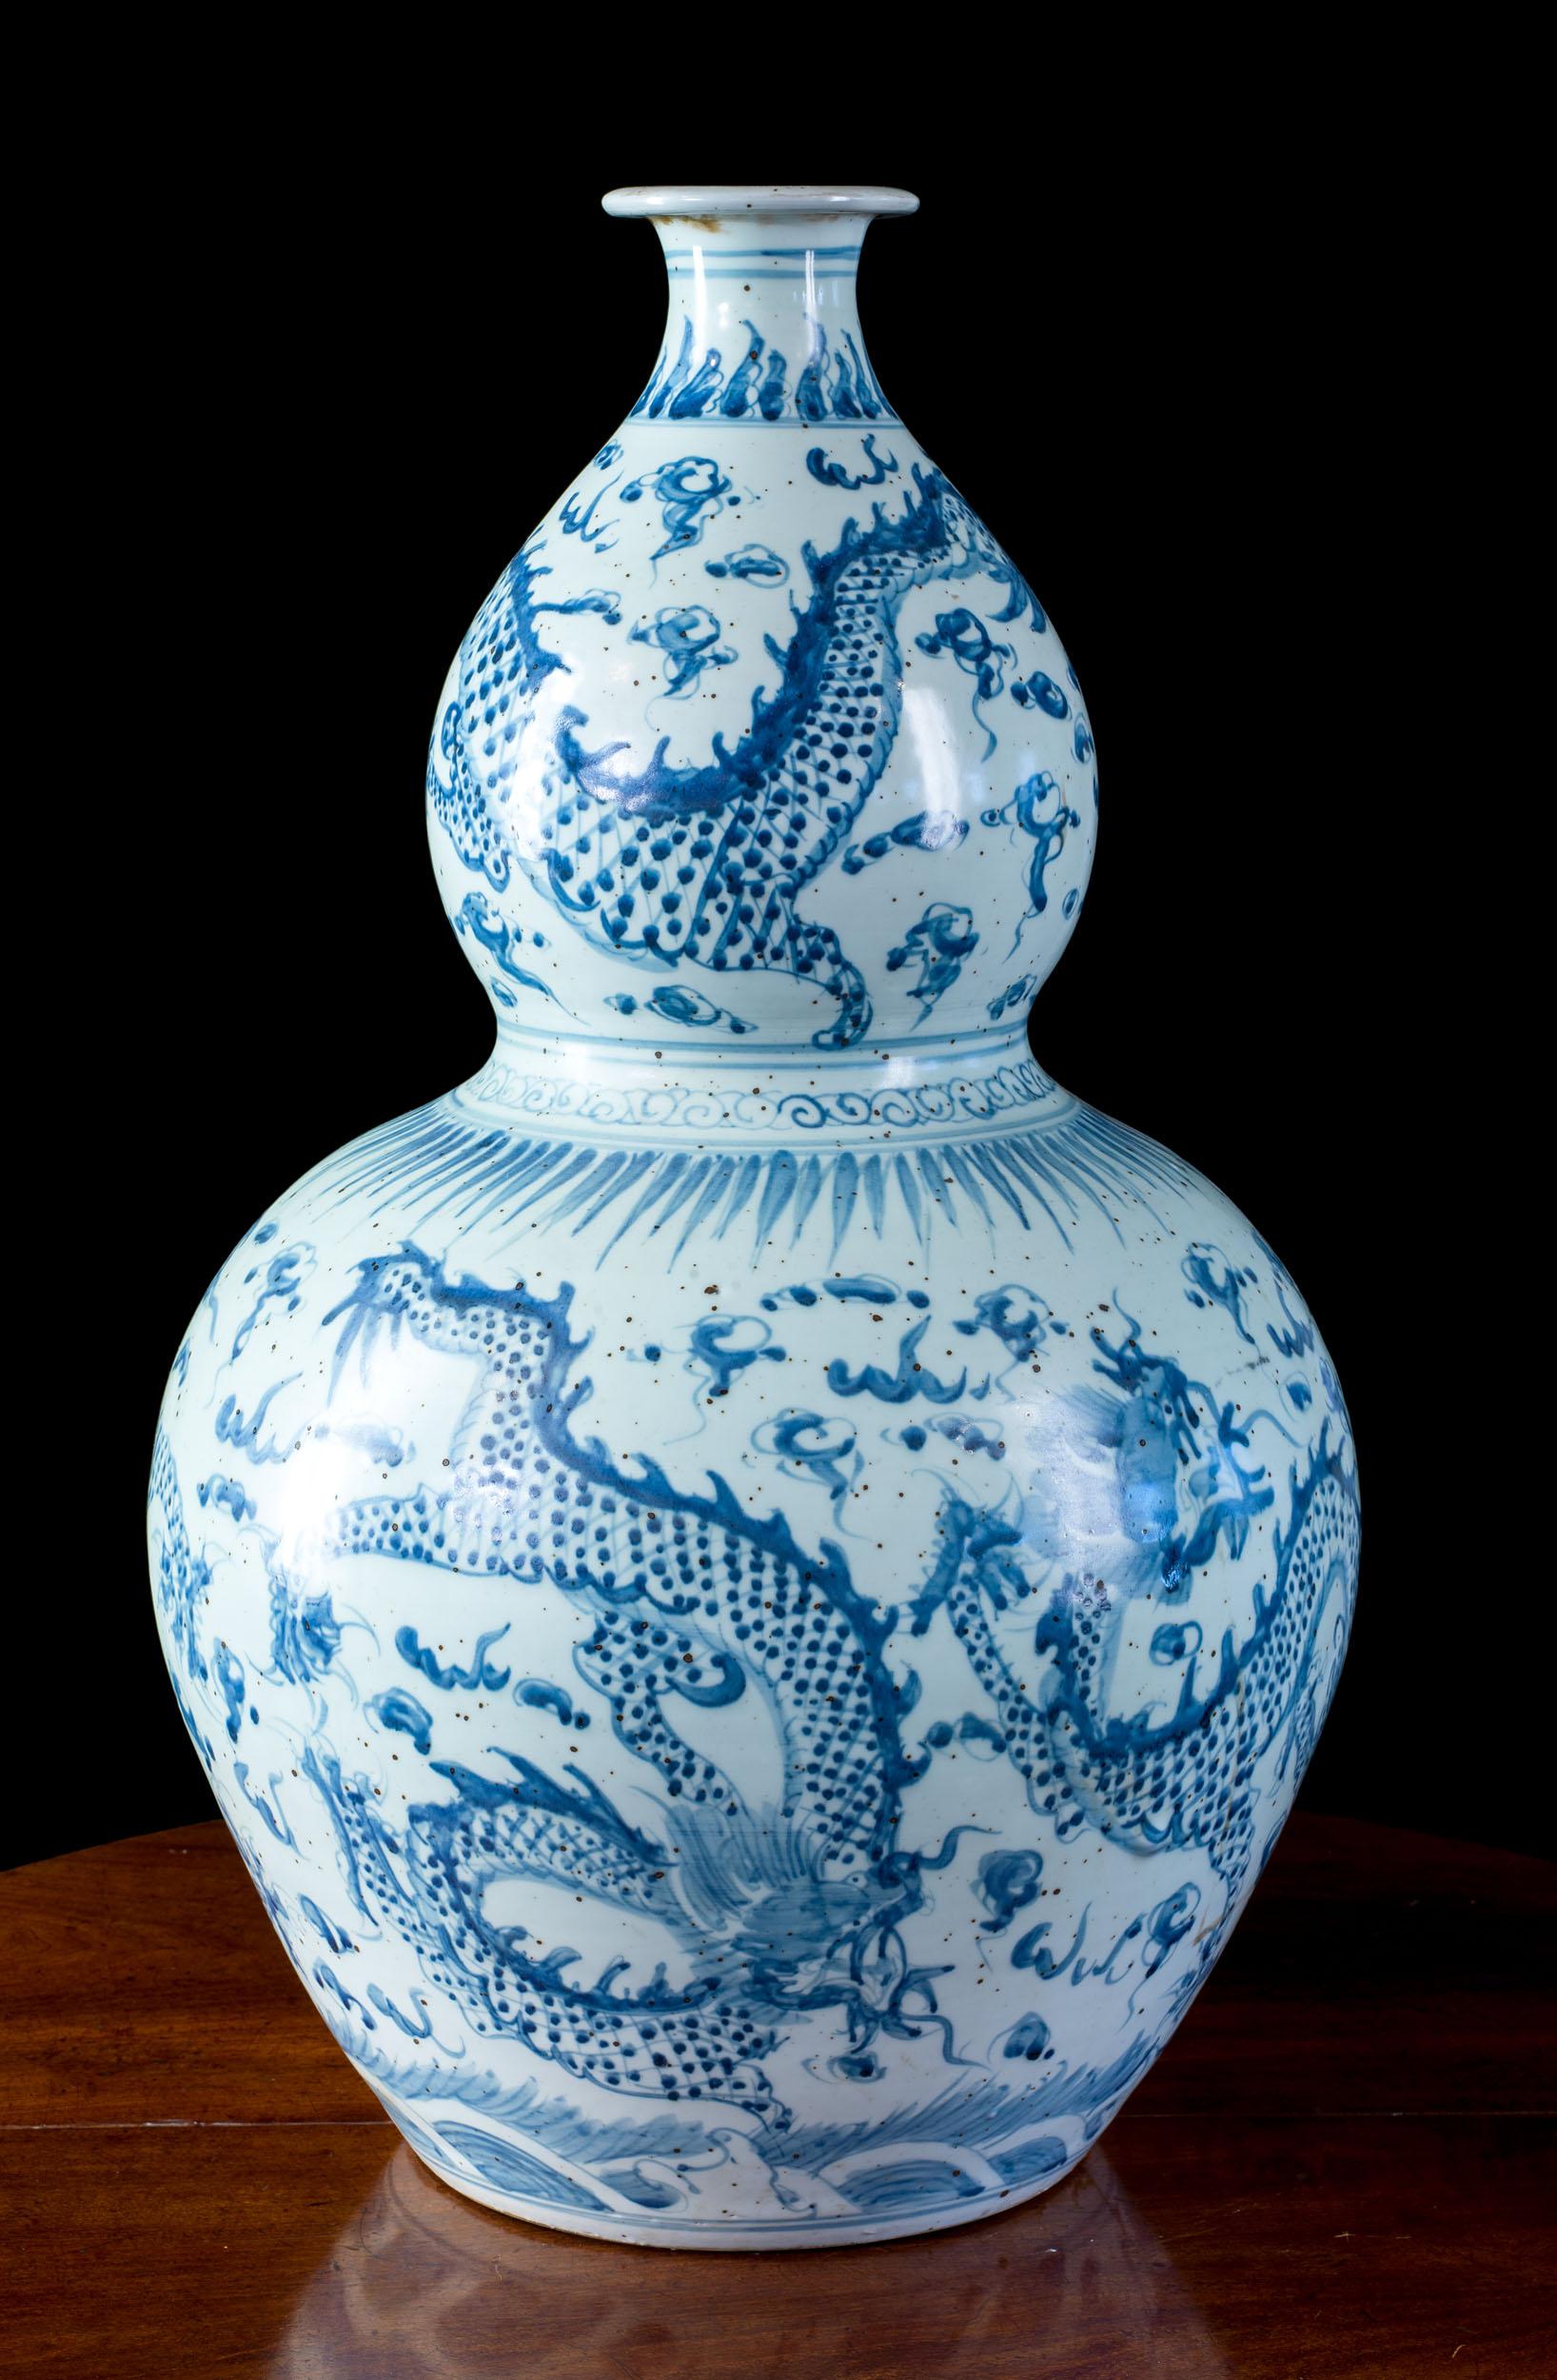 An antique Chinese blue and white calabash vase. The vase is hand painted with the 'dragon chasing the flaming pearl' motif. Far from the fearsome representation of the dragon in Western Art, in Chinese iconography, the dragon is seen as a